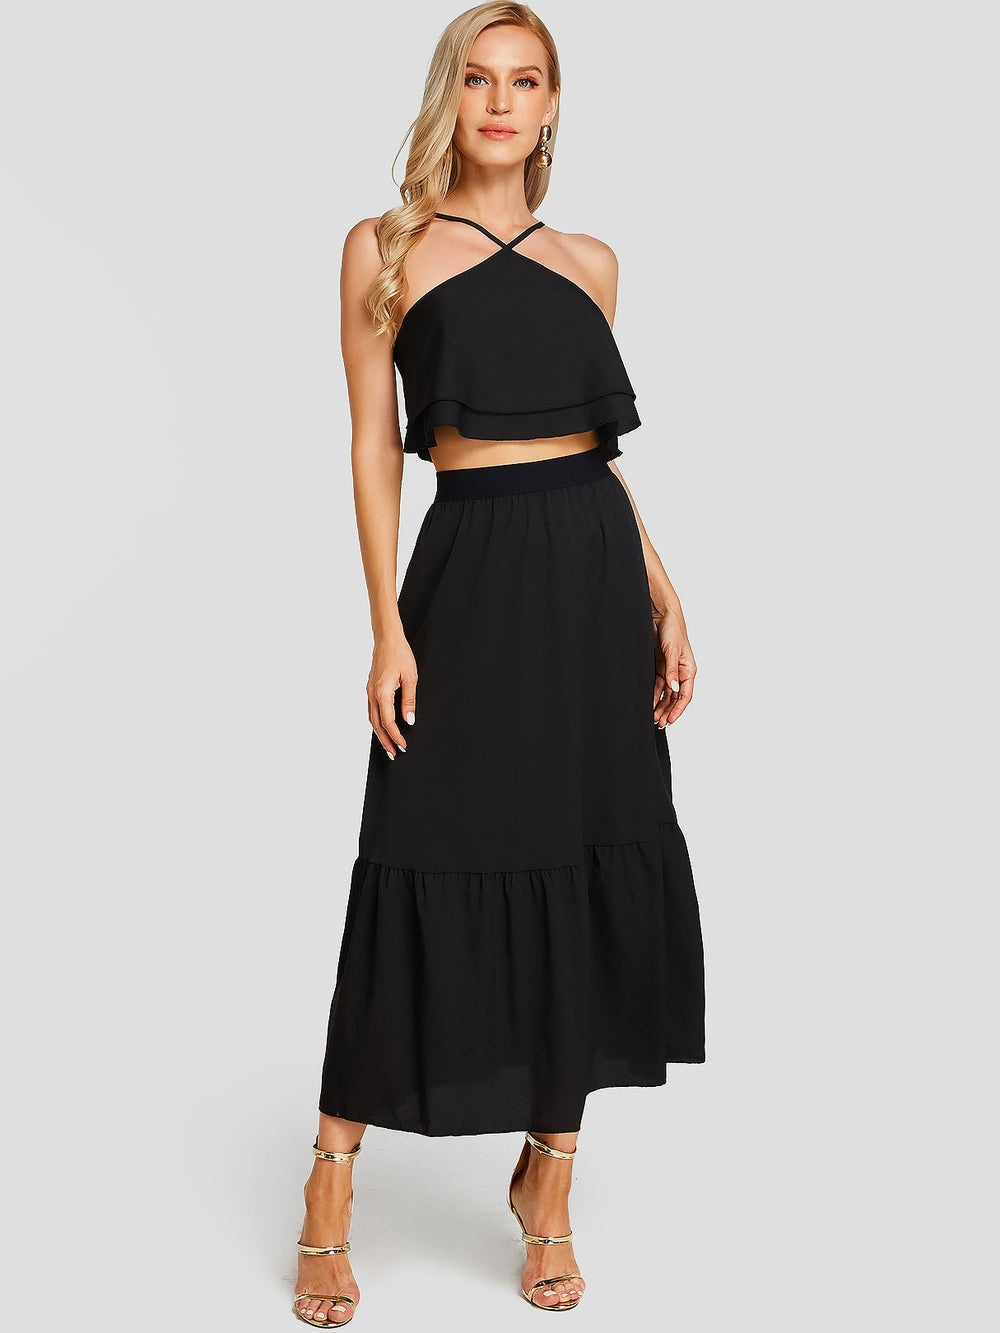 Halter Backless Sleeveless Black Two Piece Outfits